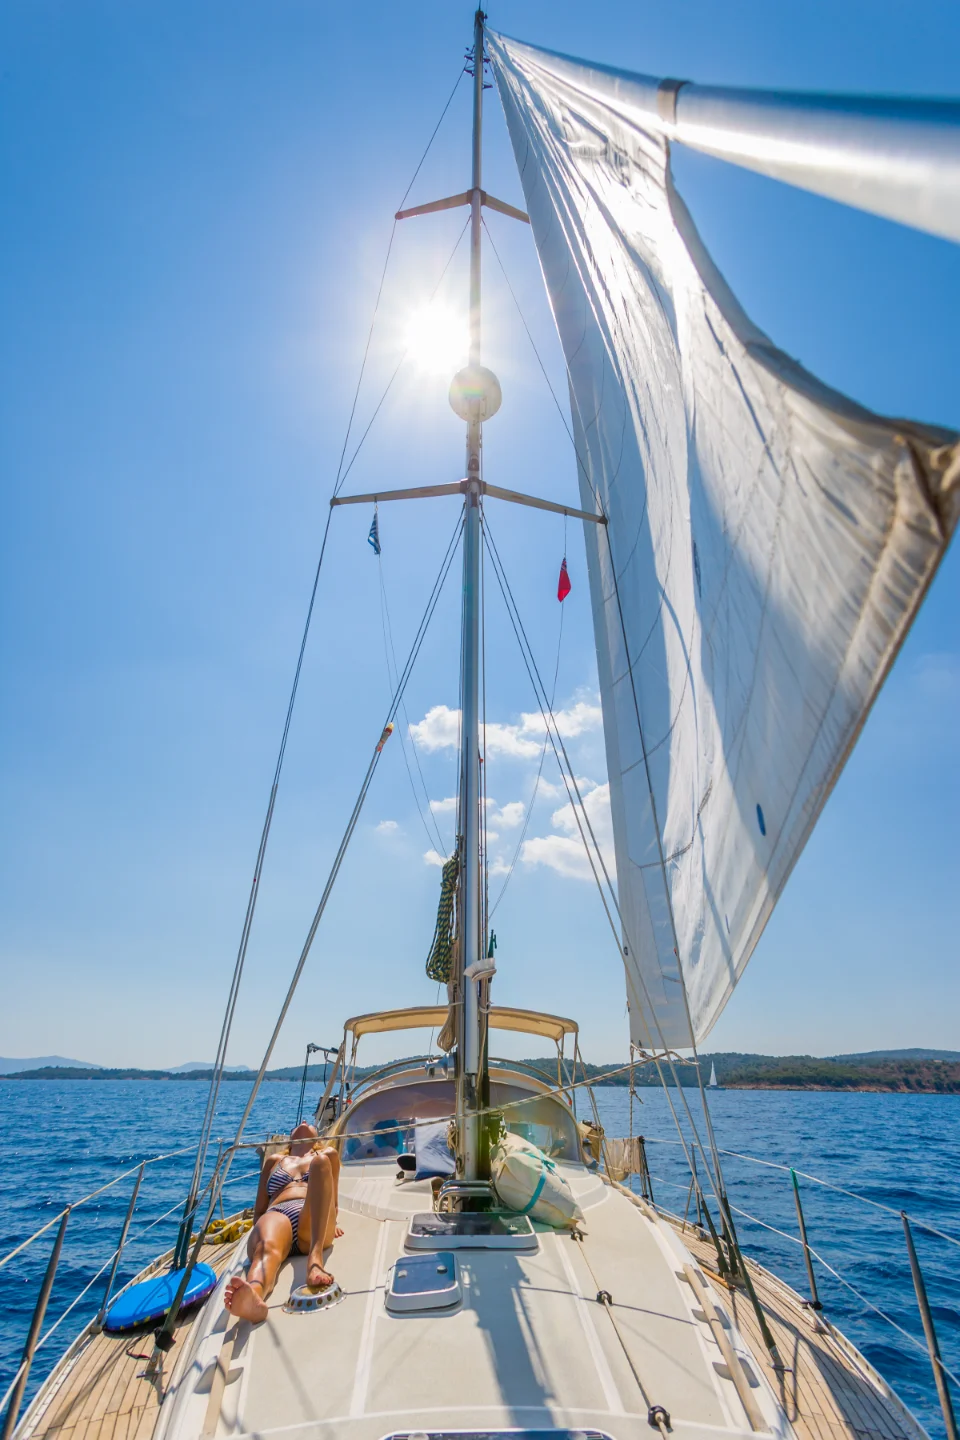 A person is lying on the deck of a sailboat under a sunny, clear blue sky. The sails are fully extended, and the boat is cruising on calm, blue waters. The sun is shining brightly, casting shadows on the deck, with distant land visible on the horizon.